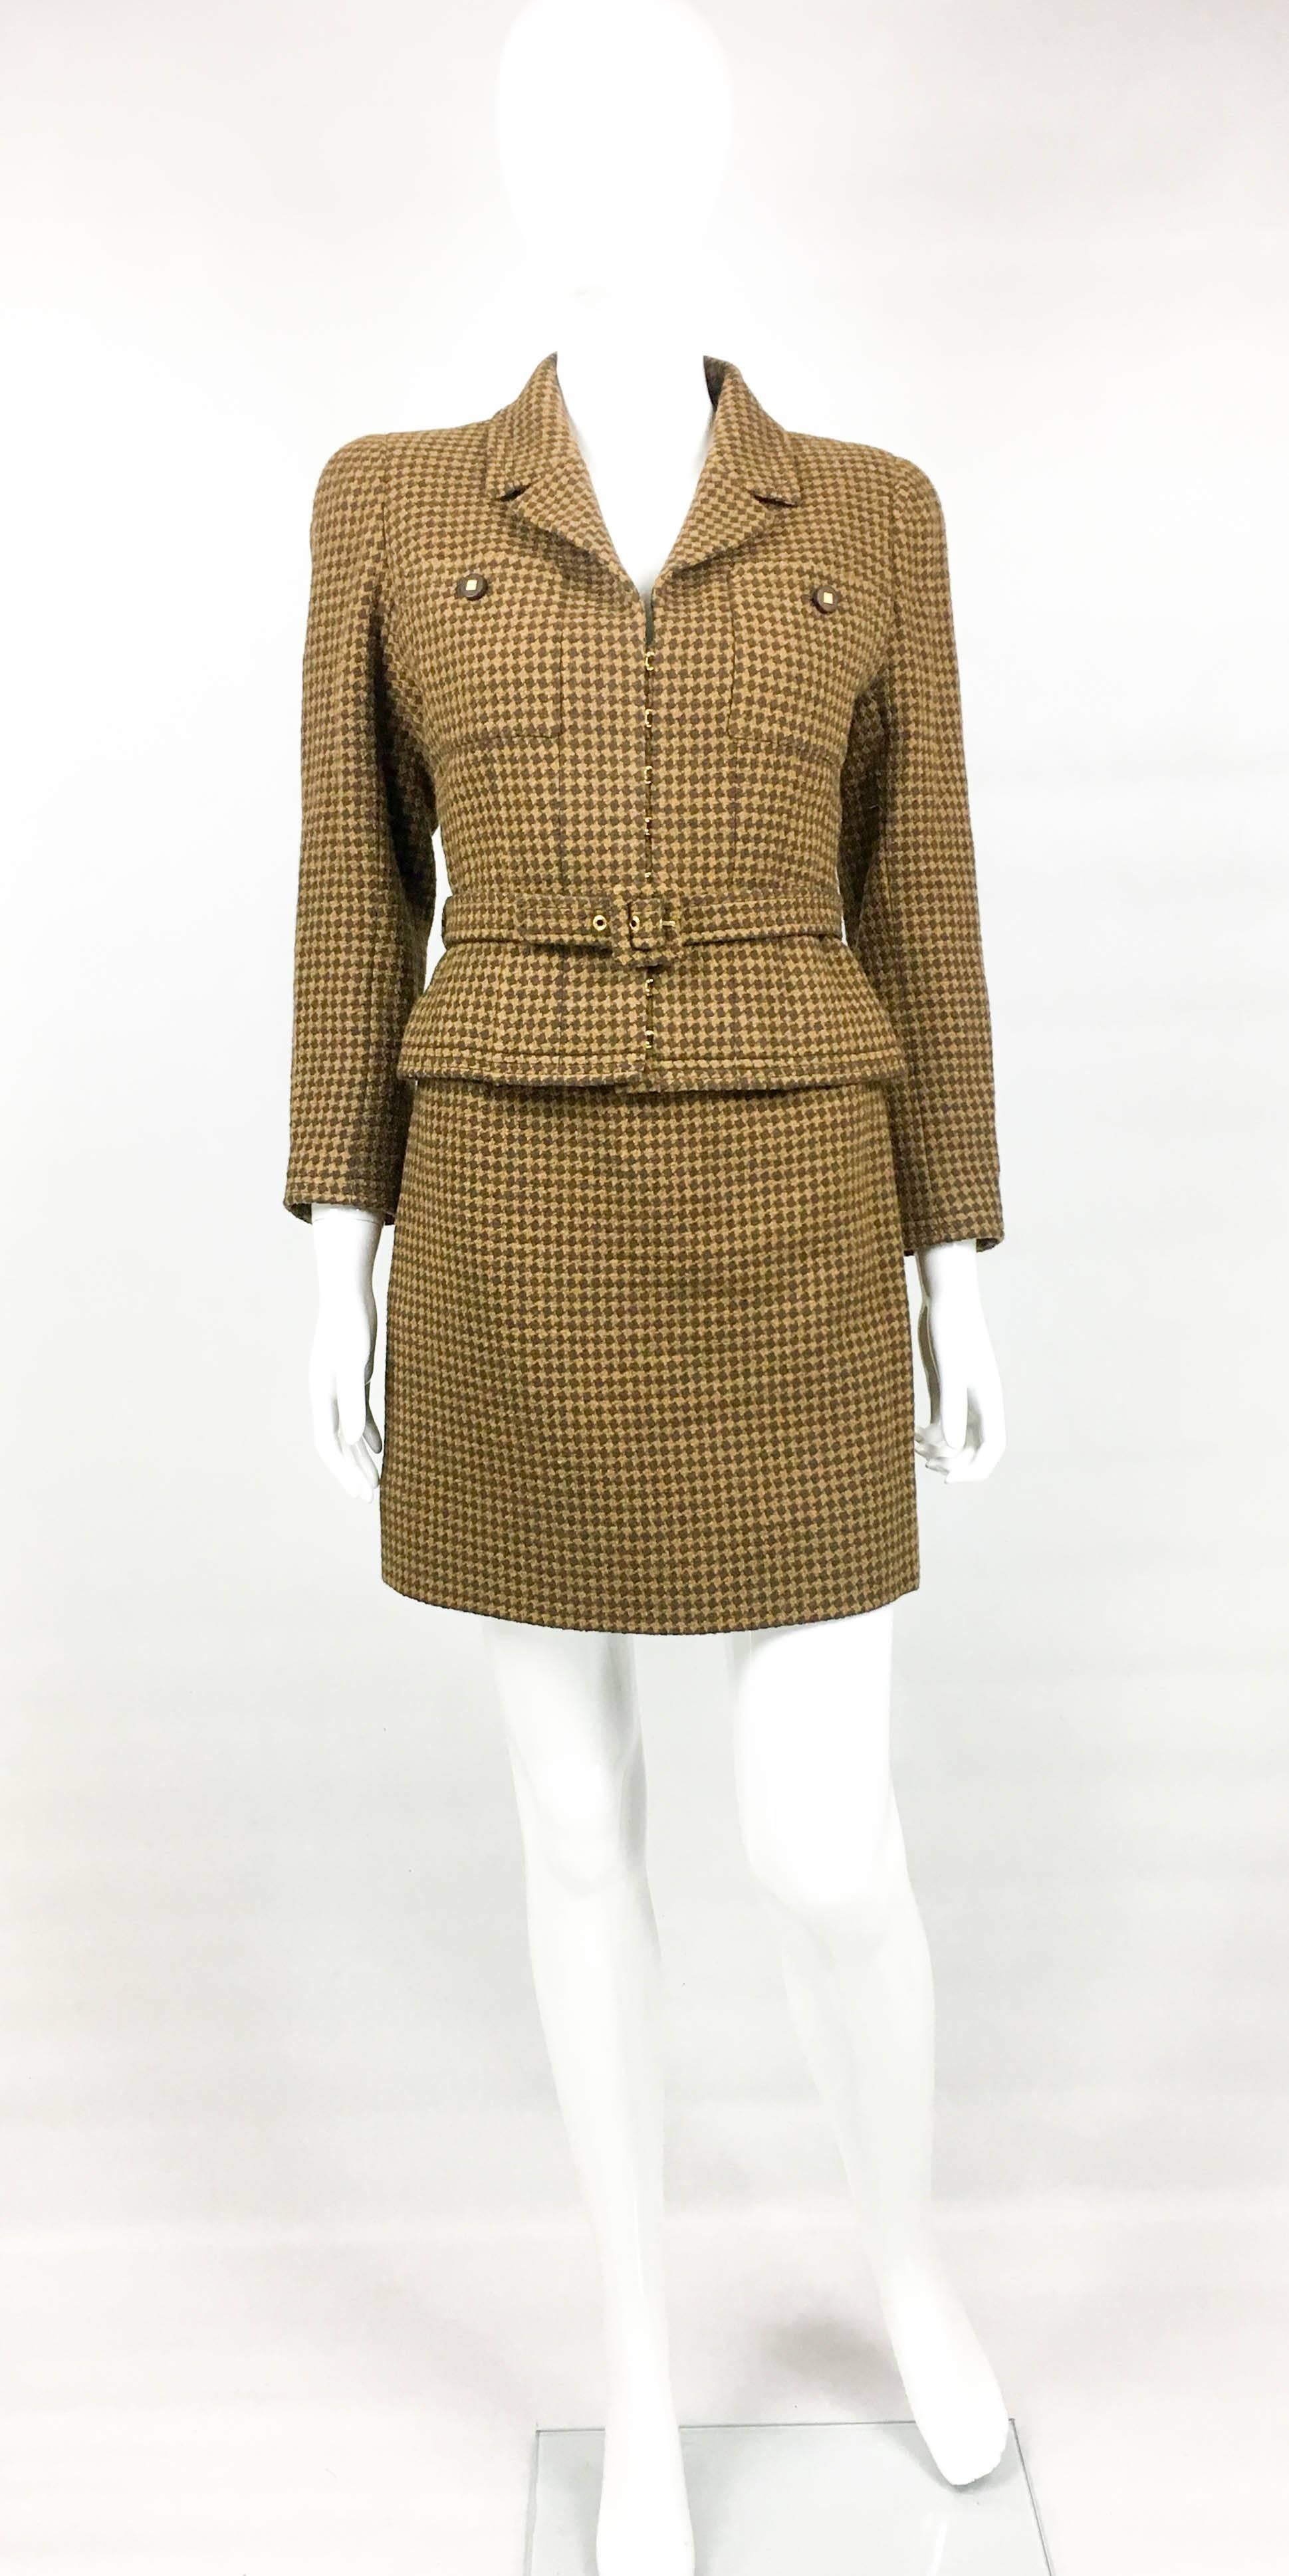 Vintage Chanel Brown Houndstooth Skirt Suit. This beautiful suit by Chanel is from the 1996 Autumn / Winter Collection. Crafted in brown wool houndstooth, it comprises a short skirt and fitted jacket. Both pieces are lined in silk. The jacket